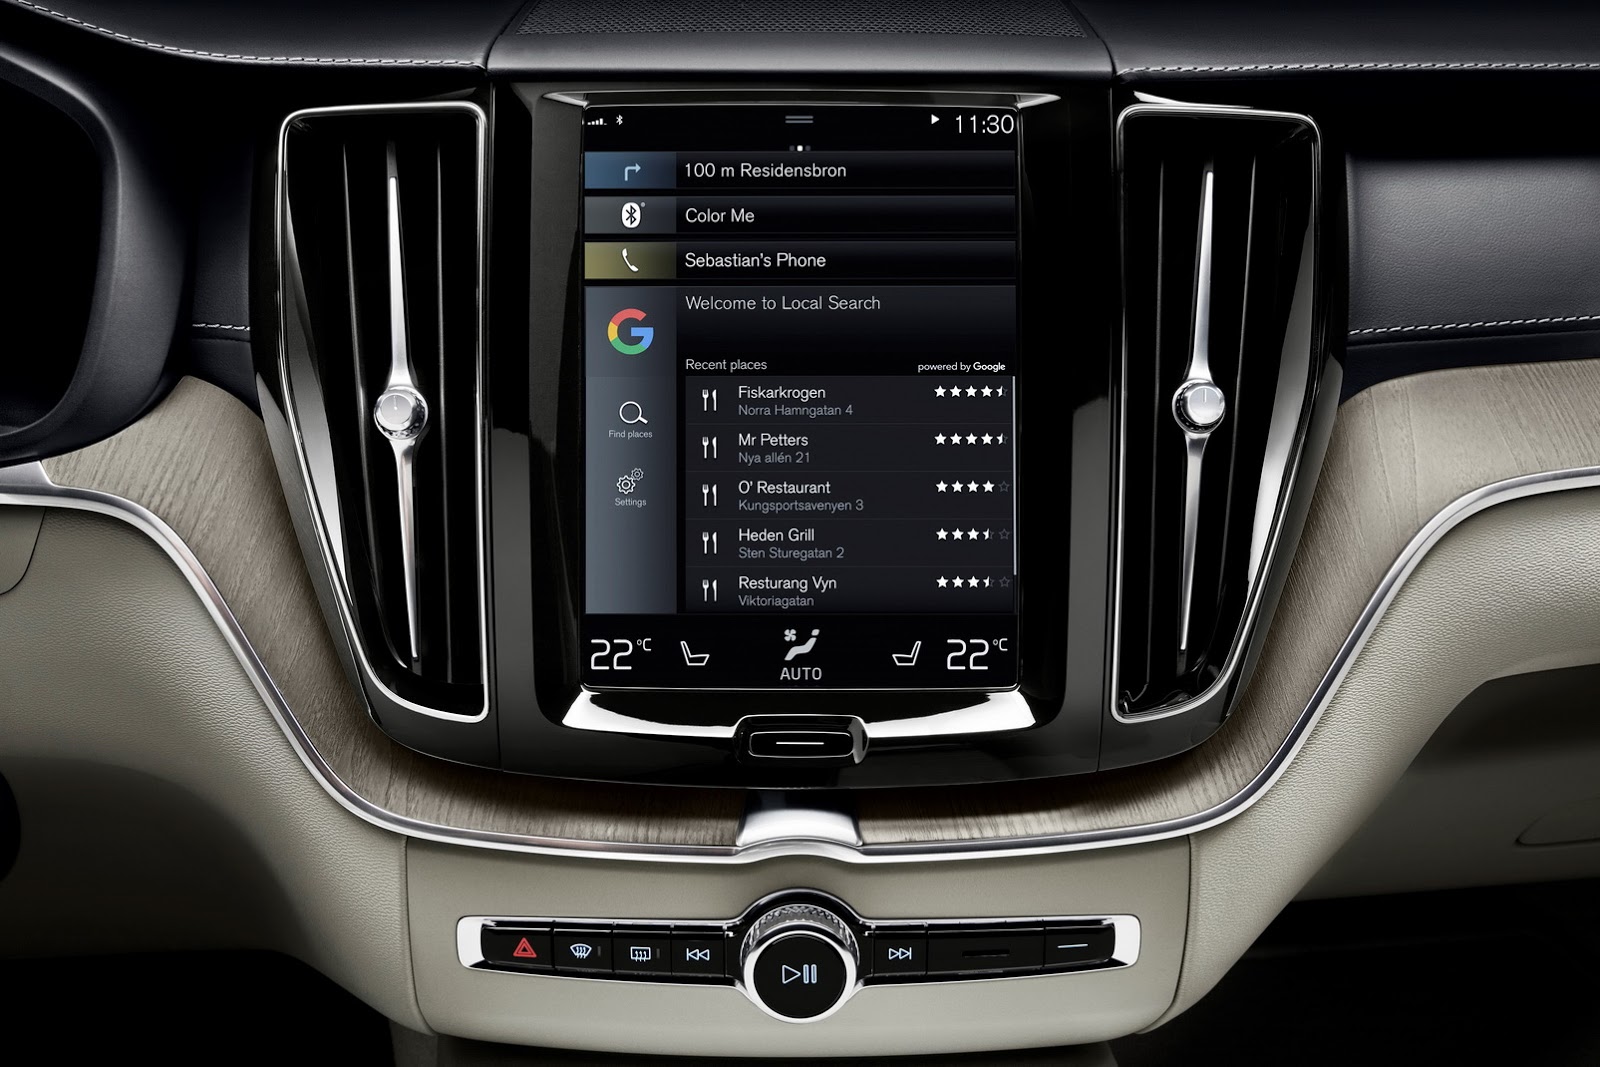 Volvo Teamed-up with Google to Develop Android Based Infotainment system featuring Google Apps and Services